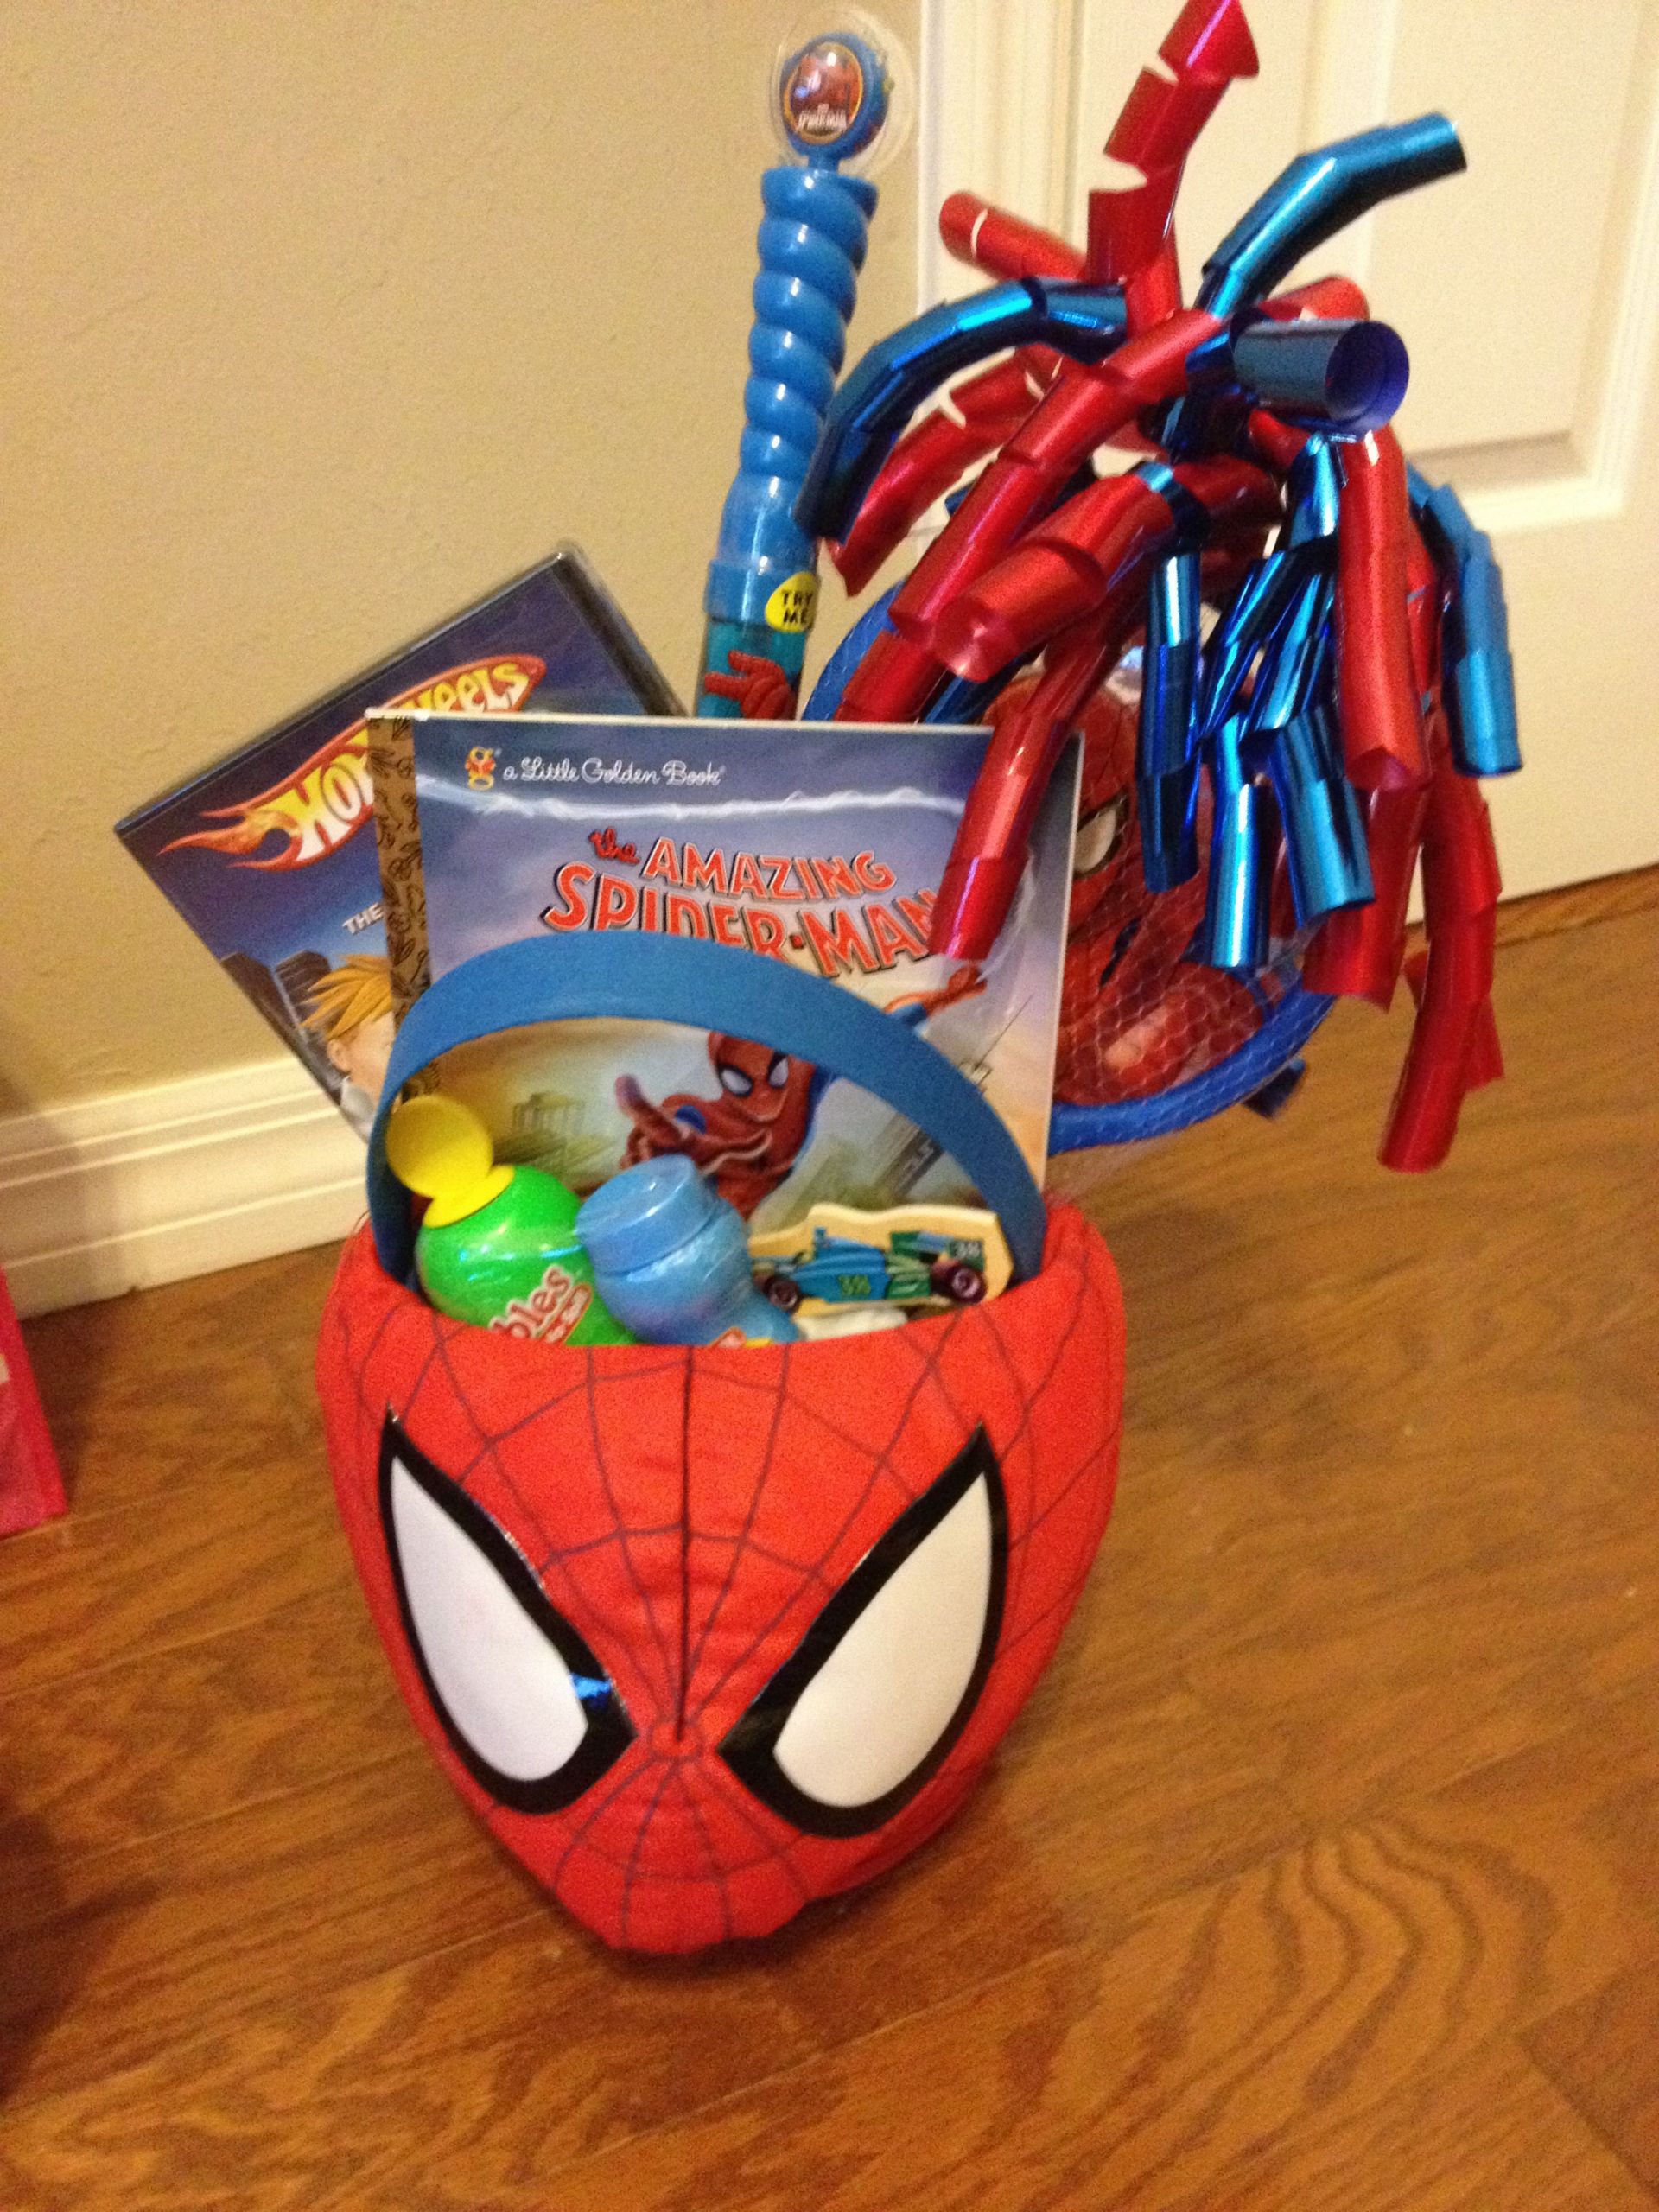 Easter Gifts For 3 Year Old
 Spiderman easter basket for three year old boy